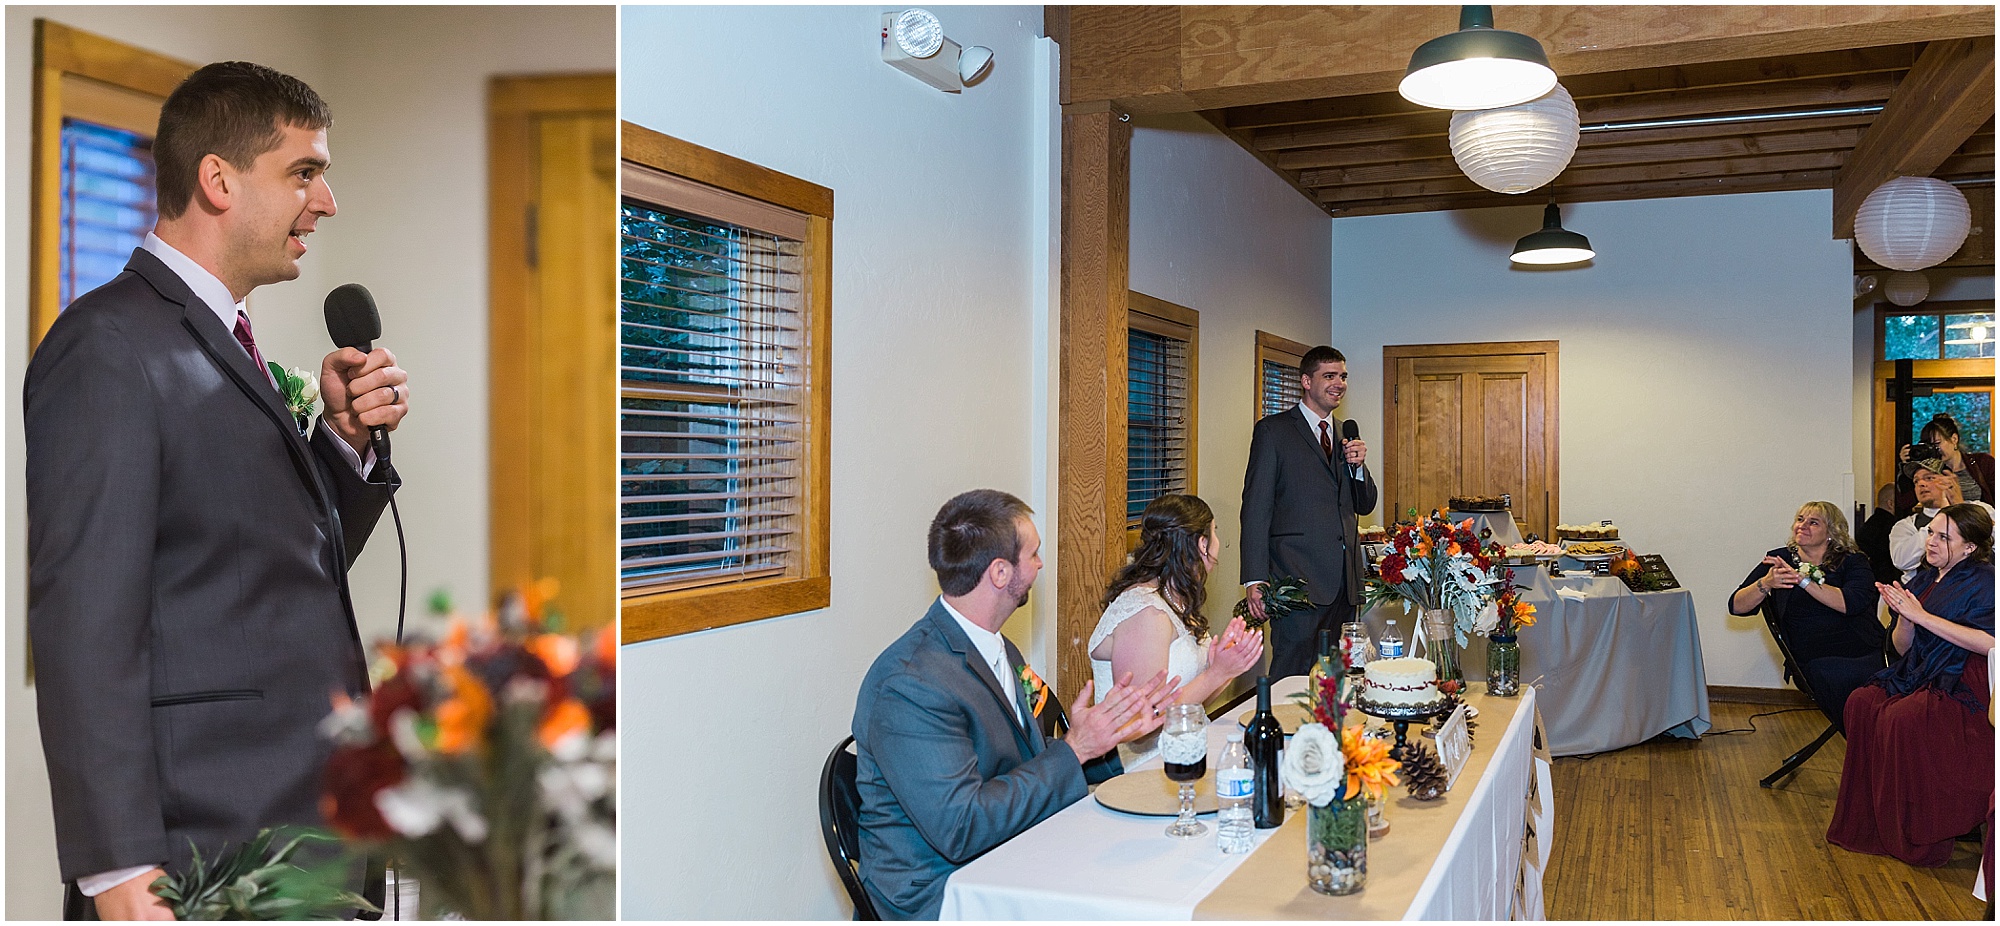 Wedding toasts to the bride & groom at this Hollinshead Barn fall wedding in Bend, Oregon. | Erica Swantek Photography